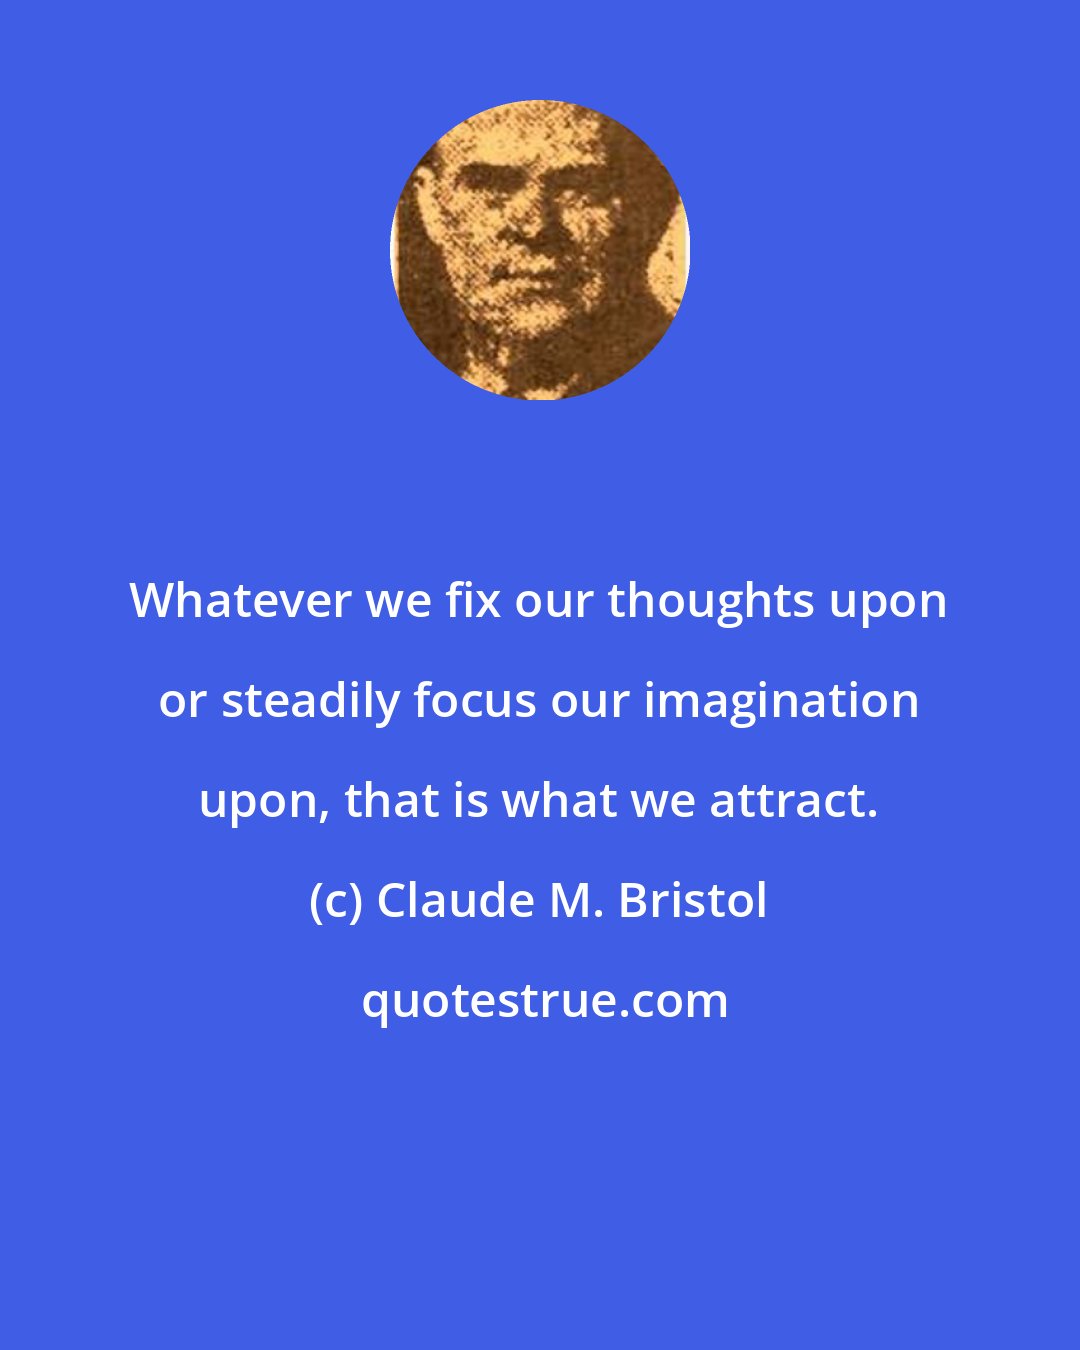 Claude M. Bristol: Whatever we fix our thoughts upon or steadily focus our imagination upon, that is what we attract.